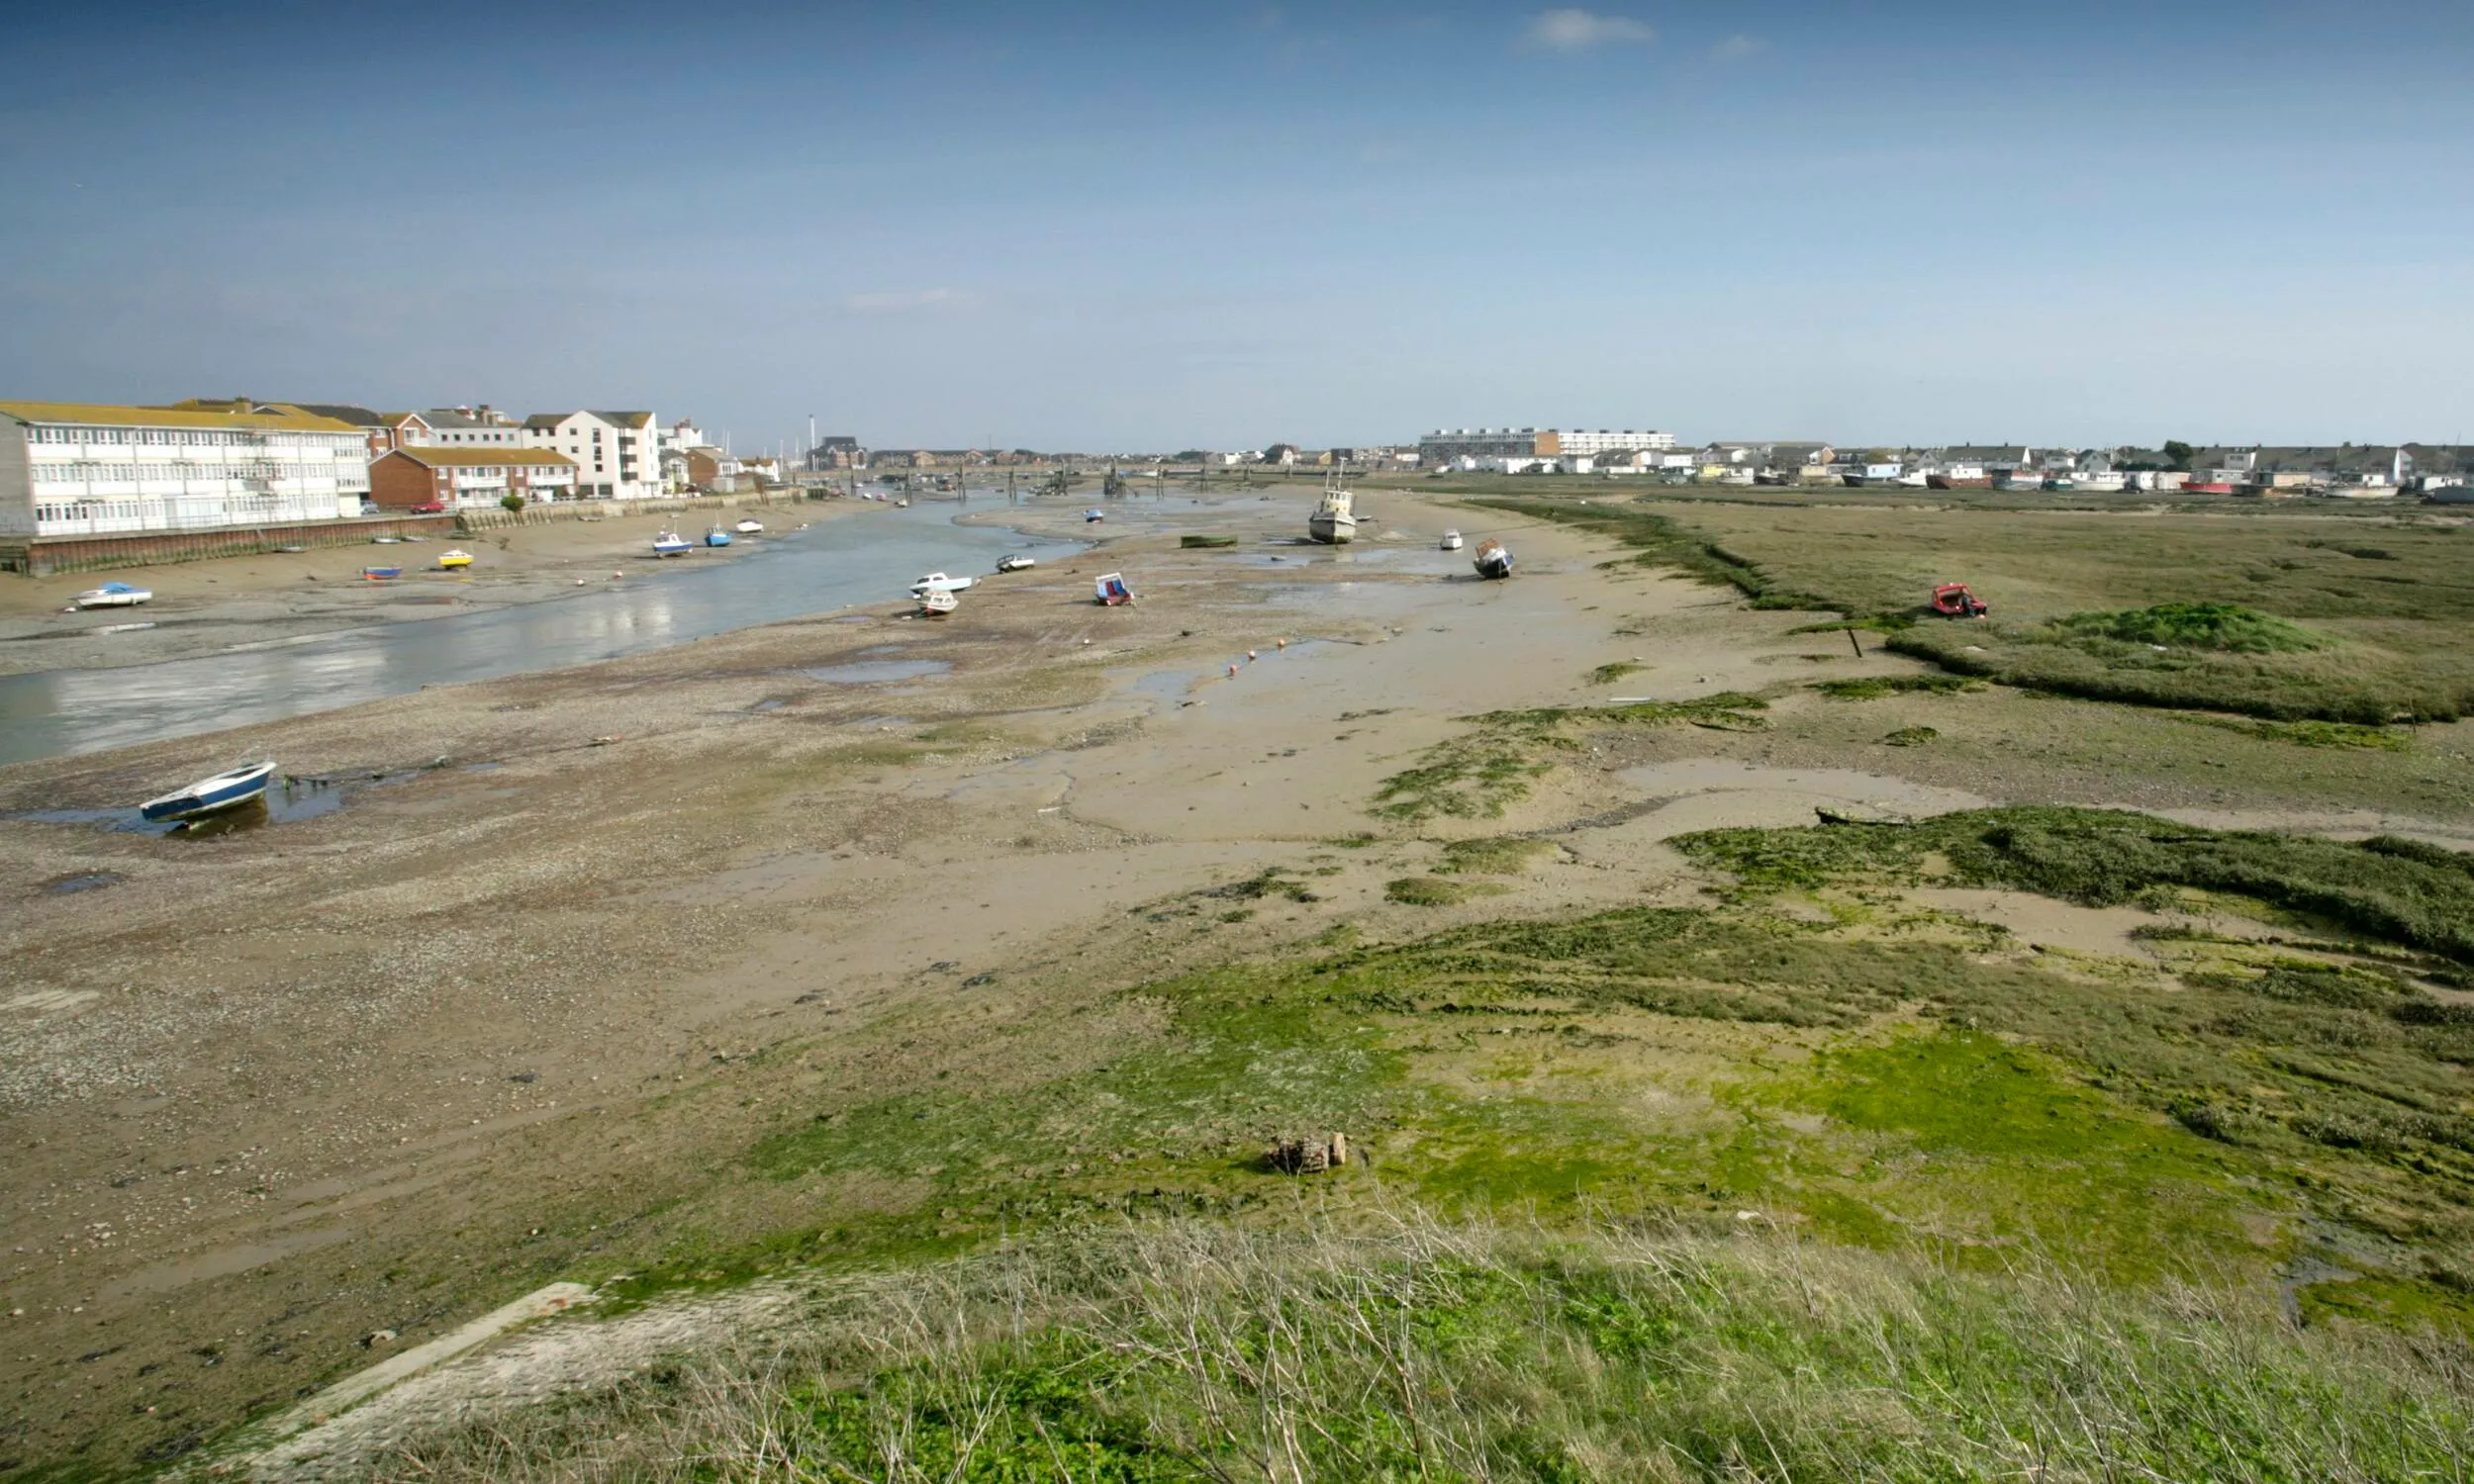 A shot of Adur Estuary, looking over grassland towards boats in the Estuary.